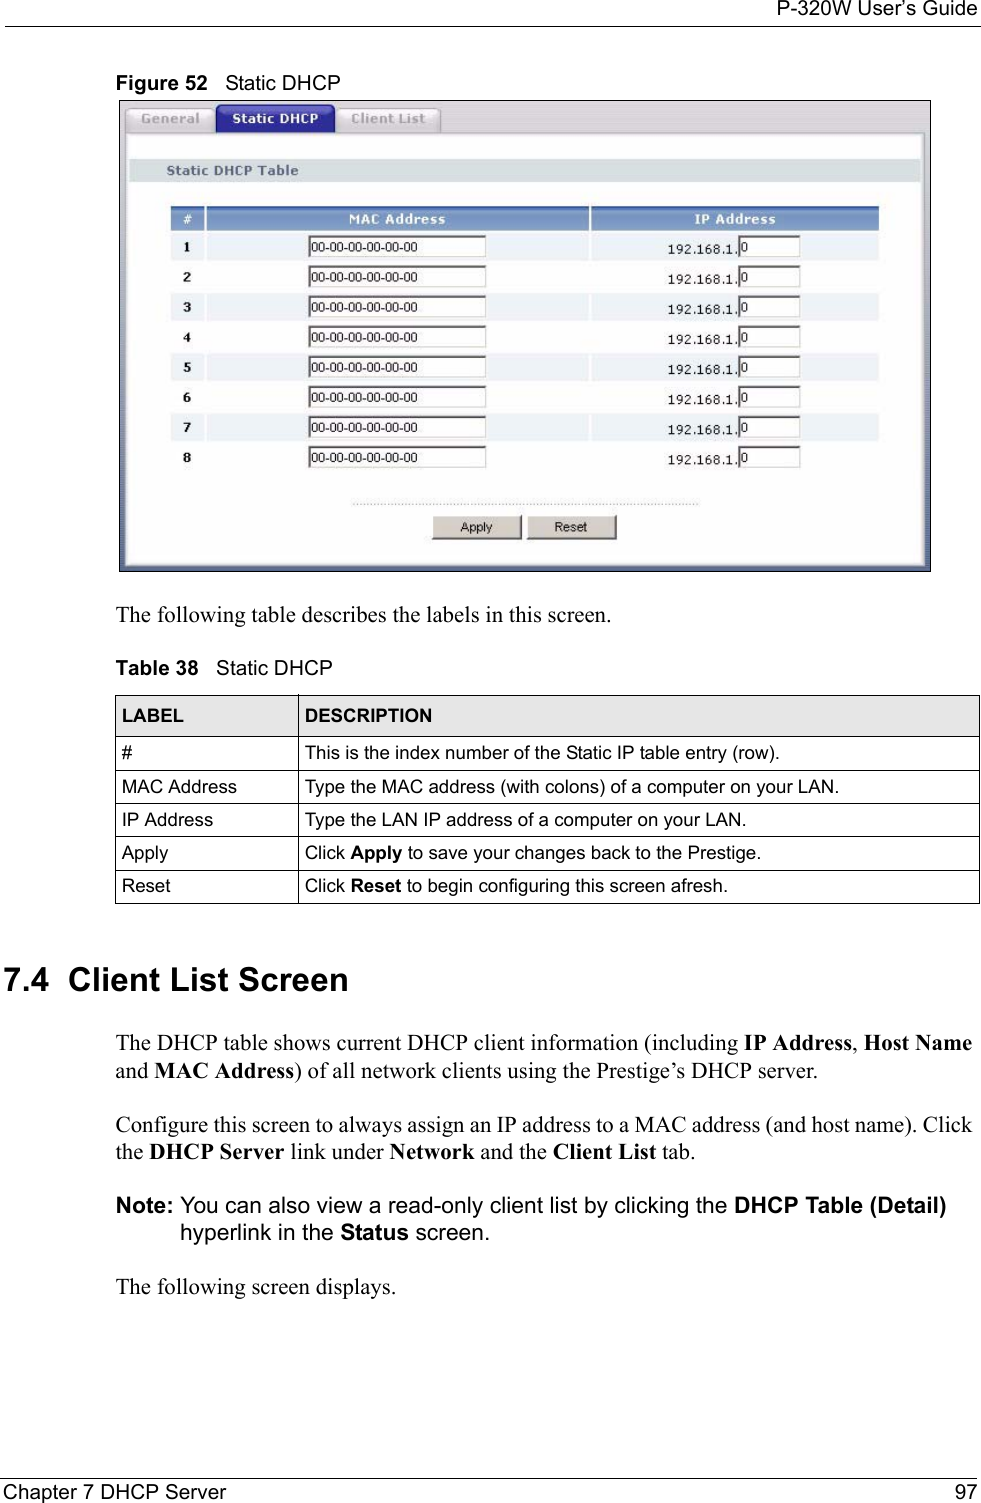 P-320W User’s GuideChapter 7 DHCP Server 97Figure 52   Static DHCPThe following table describes the labels in this screen.Table 38   Static DHCPLABEL DESCRIPTION#This is the index number of the Static IP table entry (row).MAC Address Type the MAC address (with colons) of a computer on your LAN.IP Address Type the LAN IP address of a computer on your LAN.Apply Click Apply to save your changes back to the Prestige.Reset Click Reset to begin configuring this screen afresh.7.4  Client List ScreenThe DHCP table shows current DHCP client information (including IP Address, Host Name and MAC Address) of all network clients using the Prestige’s DHCP server.Configure this screen to always assign an IP address to a MAC address (and host name). Click the DHCP Server link under Network and the Client List tab. Note: You can also view a read-only client list by clicking the DHCP Table (Detail) hyperlink in the Status screen. The following screen displays.